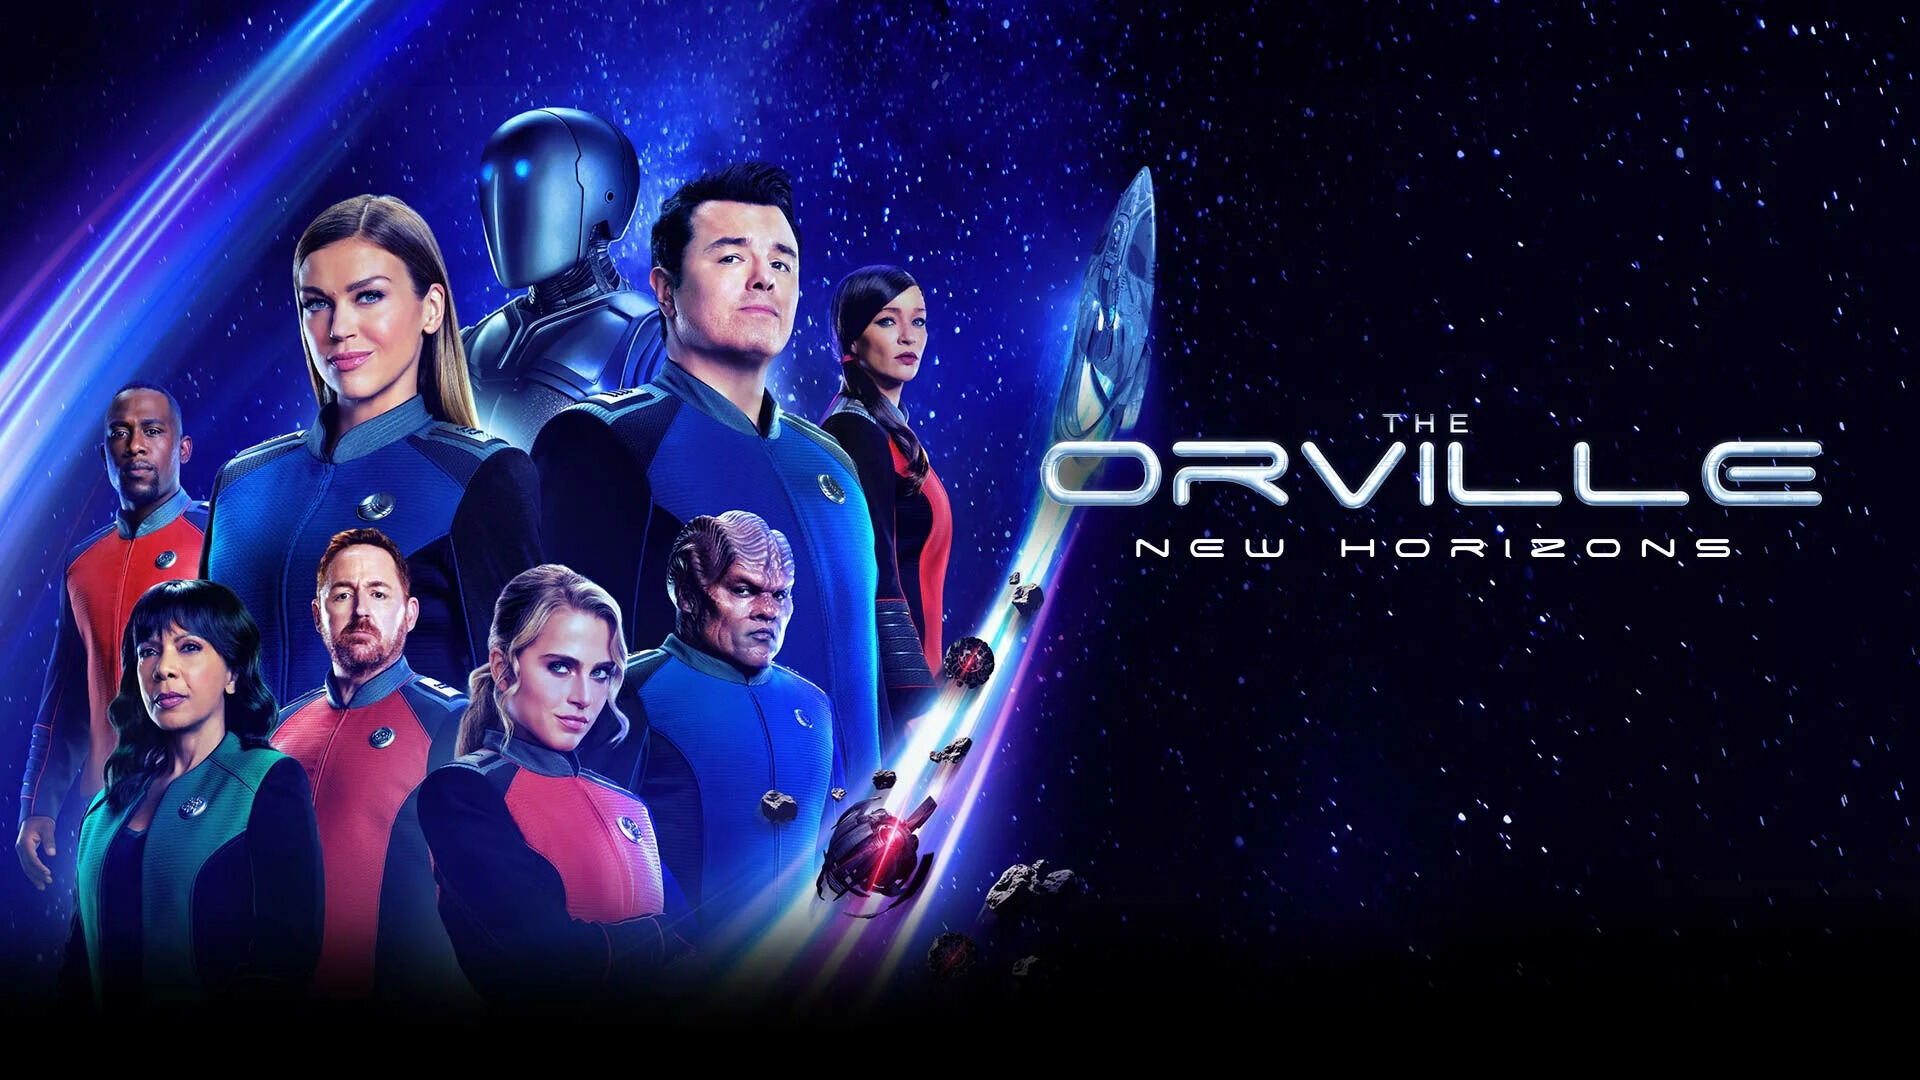 18-mind-blowing-facts-about-the-orville